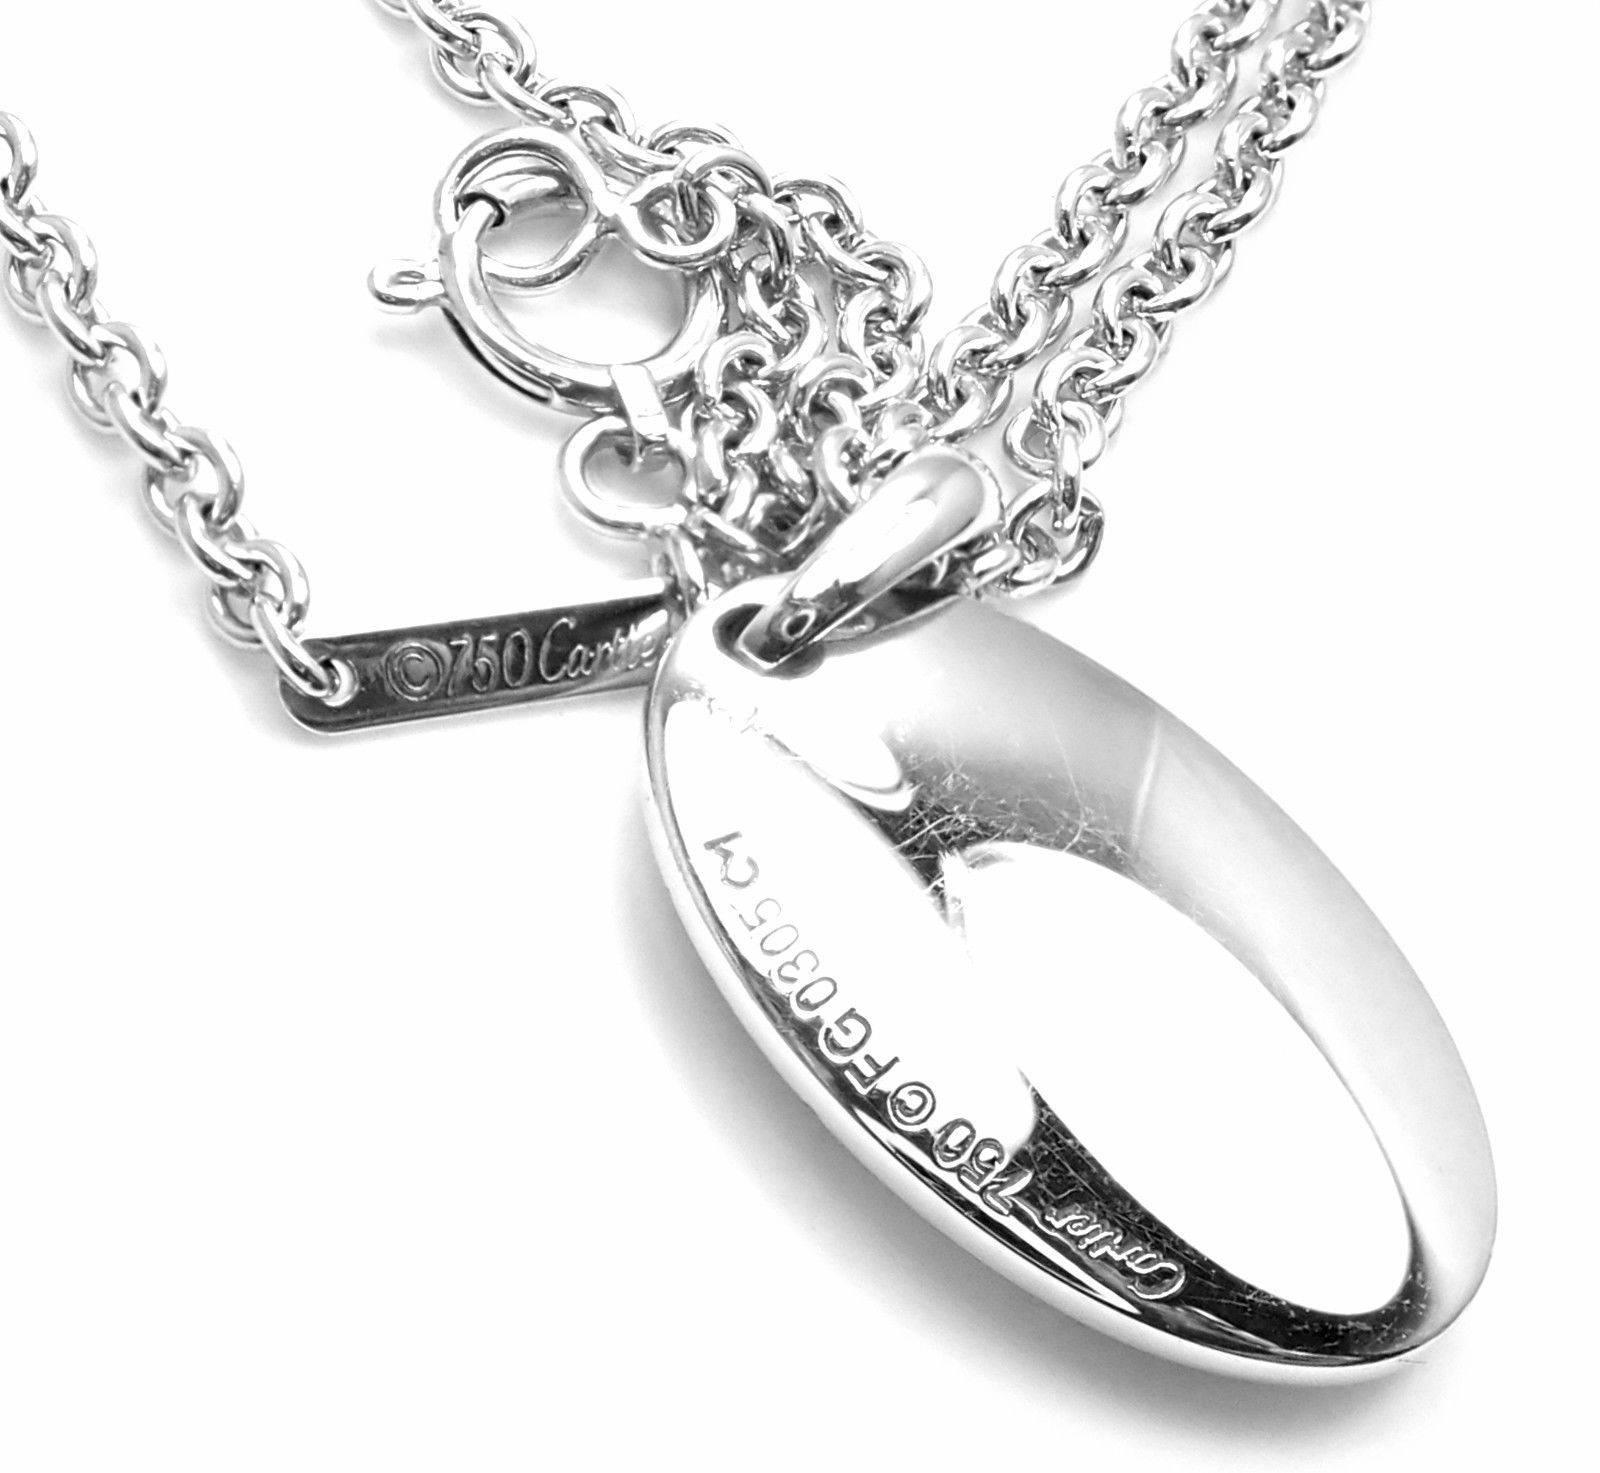 Cartier Happy Birthday Double C White Gold Charm Pendant Necklace 1